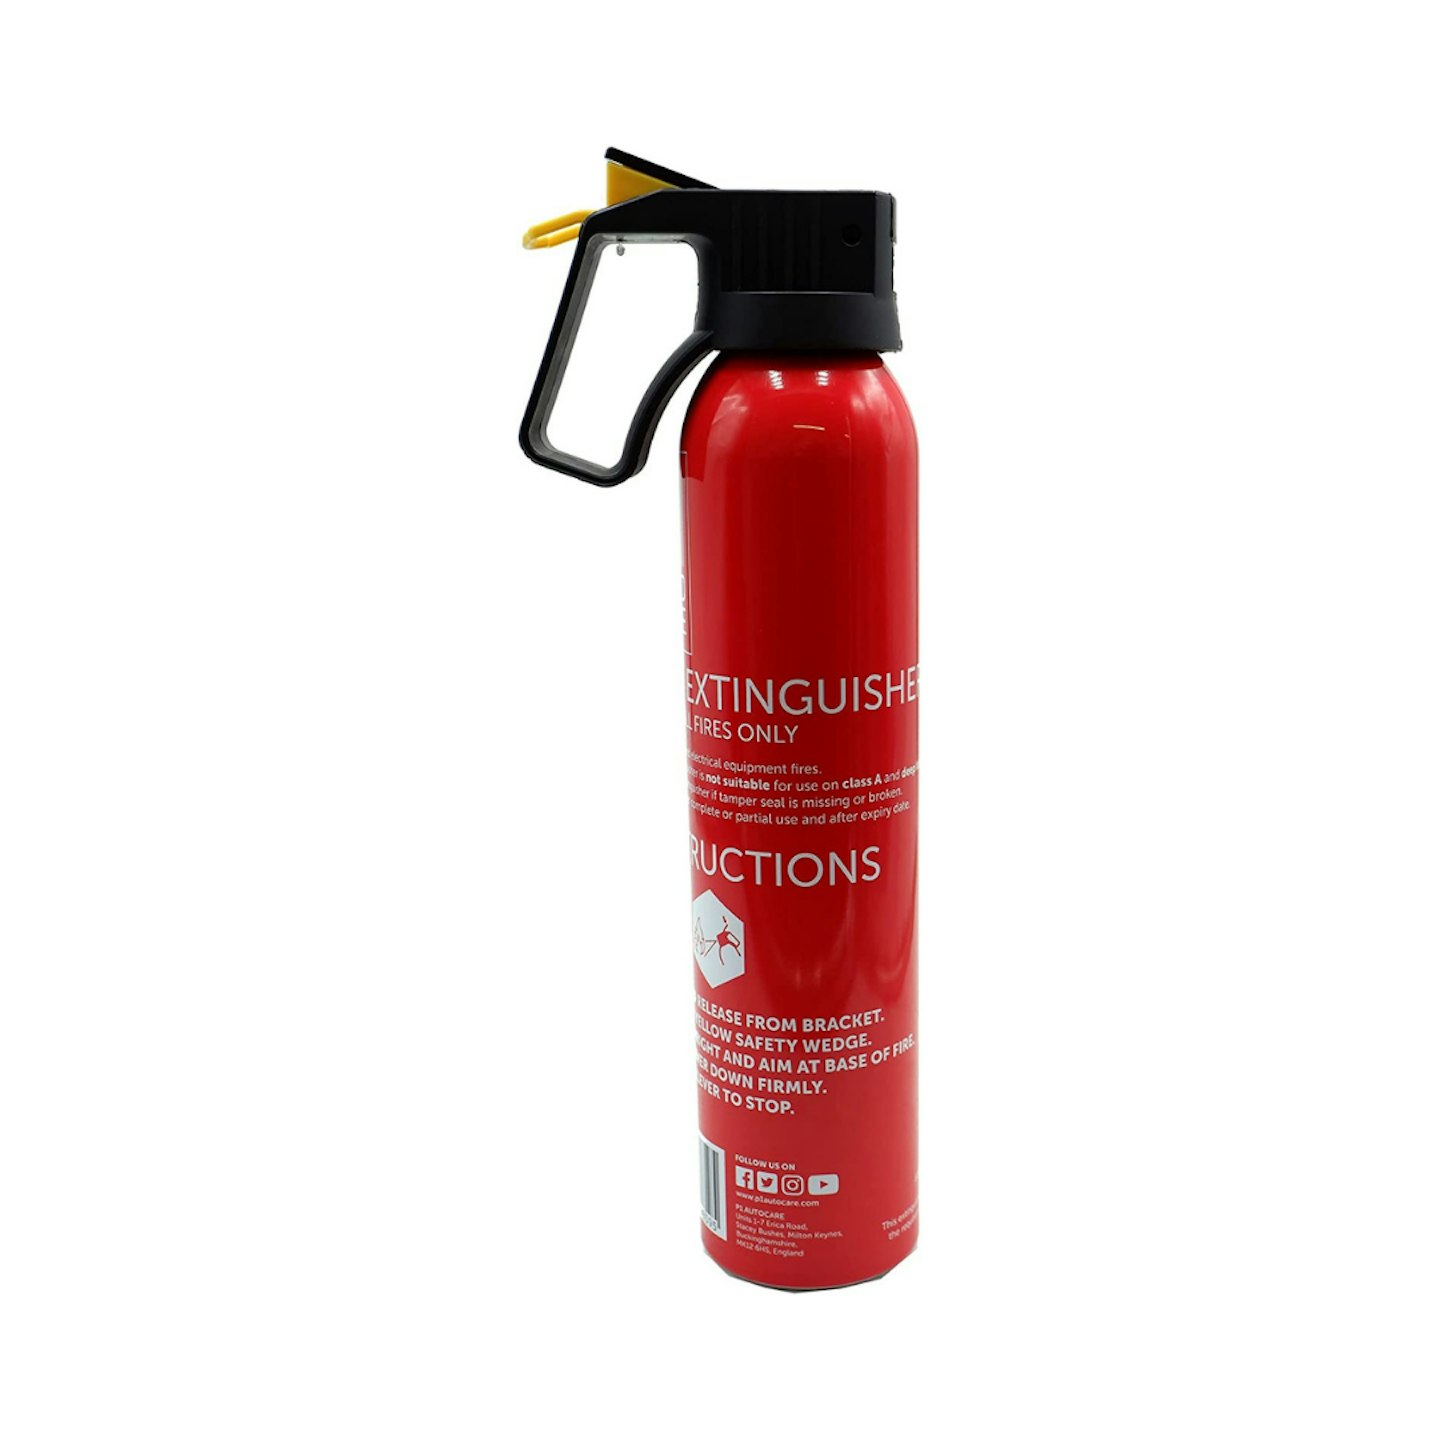 UKB4C fire extinguisher for cars